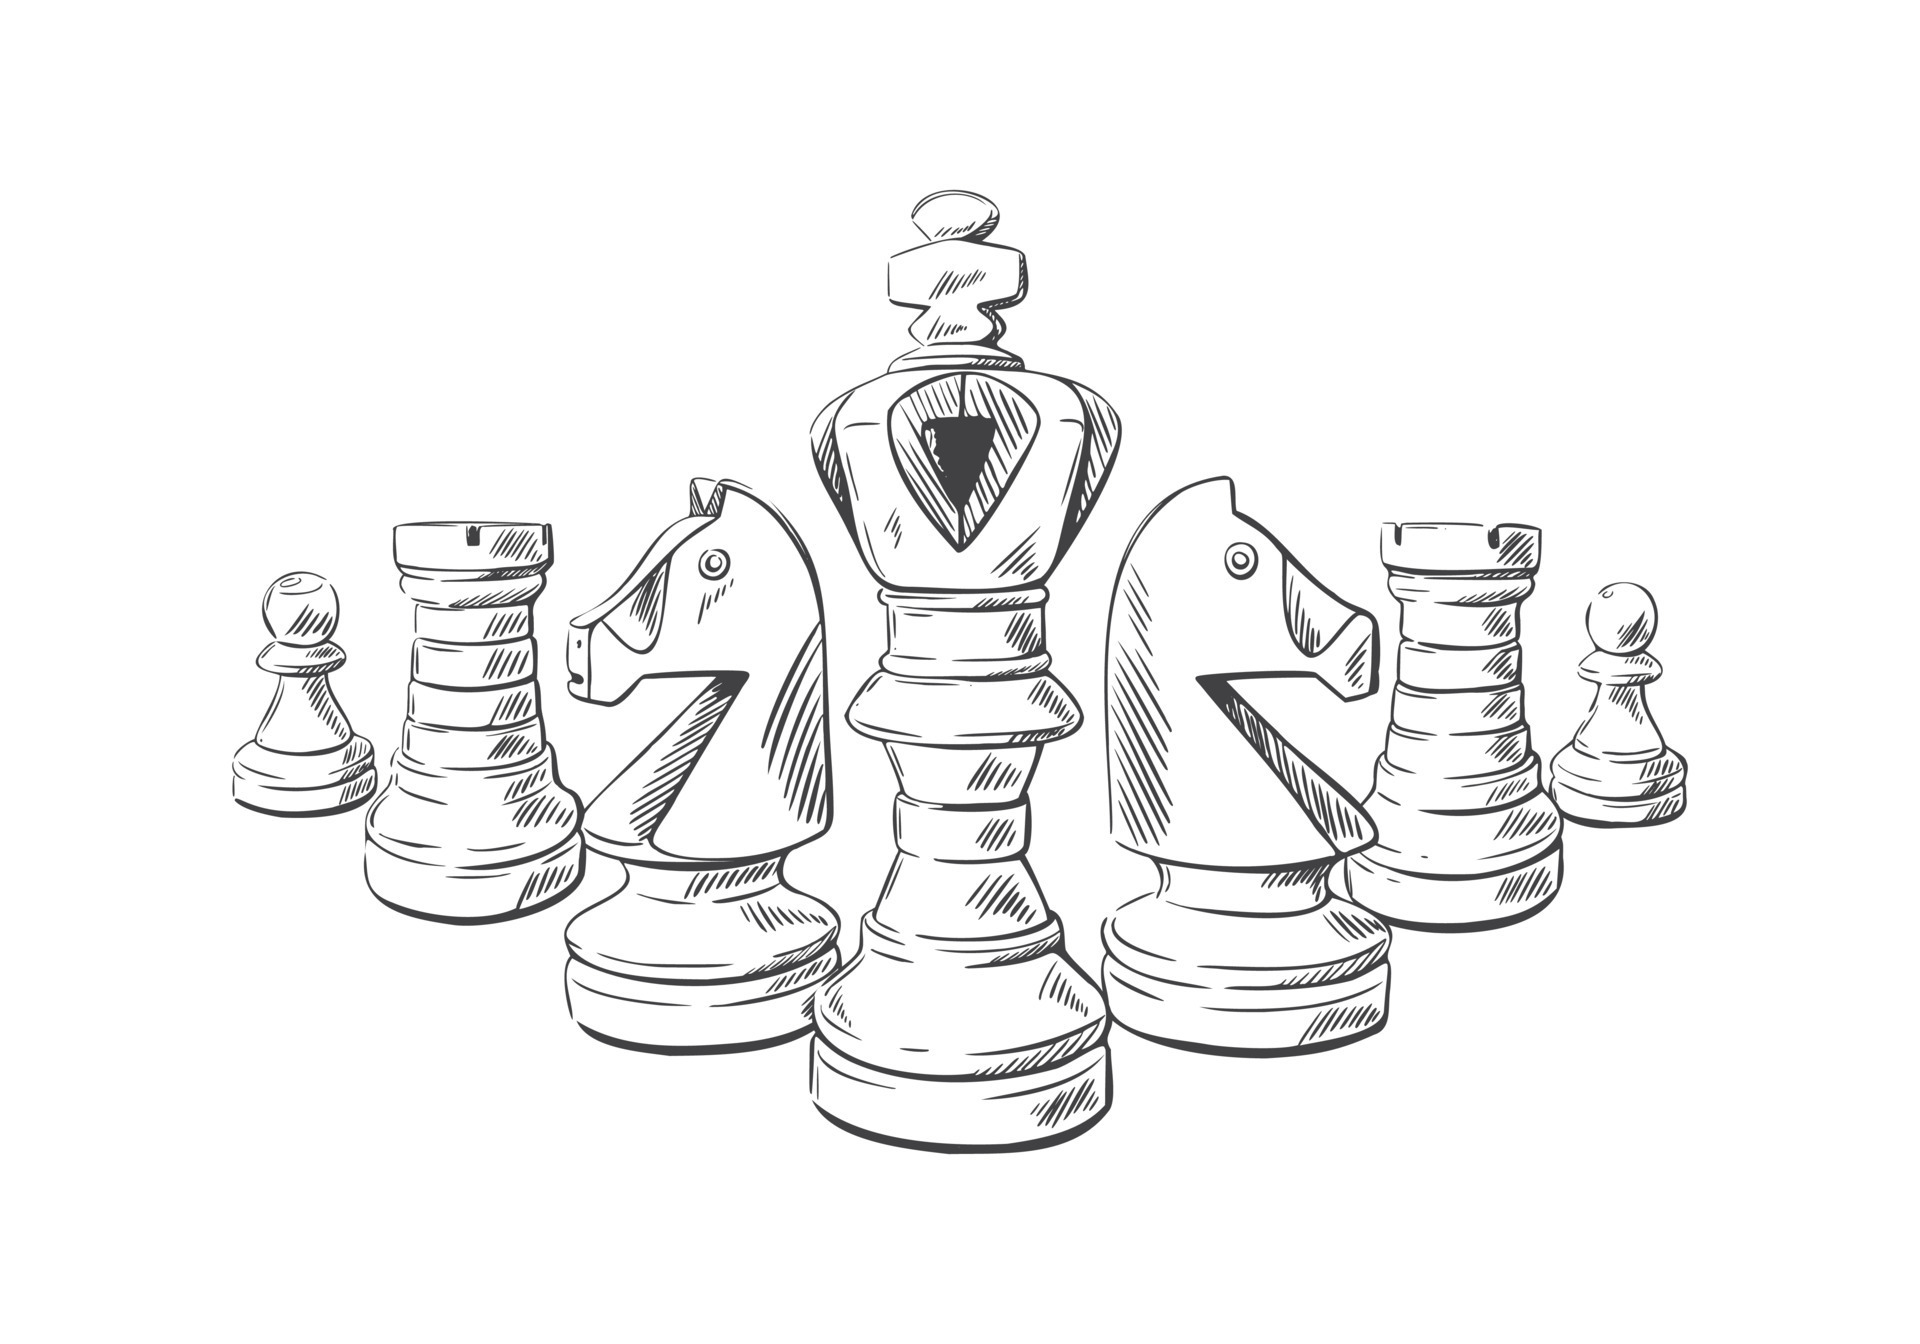 Chess pieces in sketch style. Chess club web background. Hand